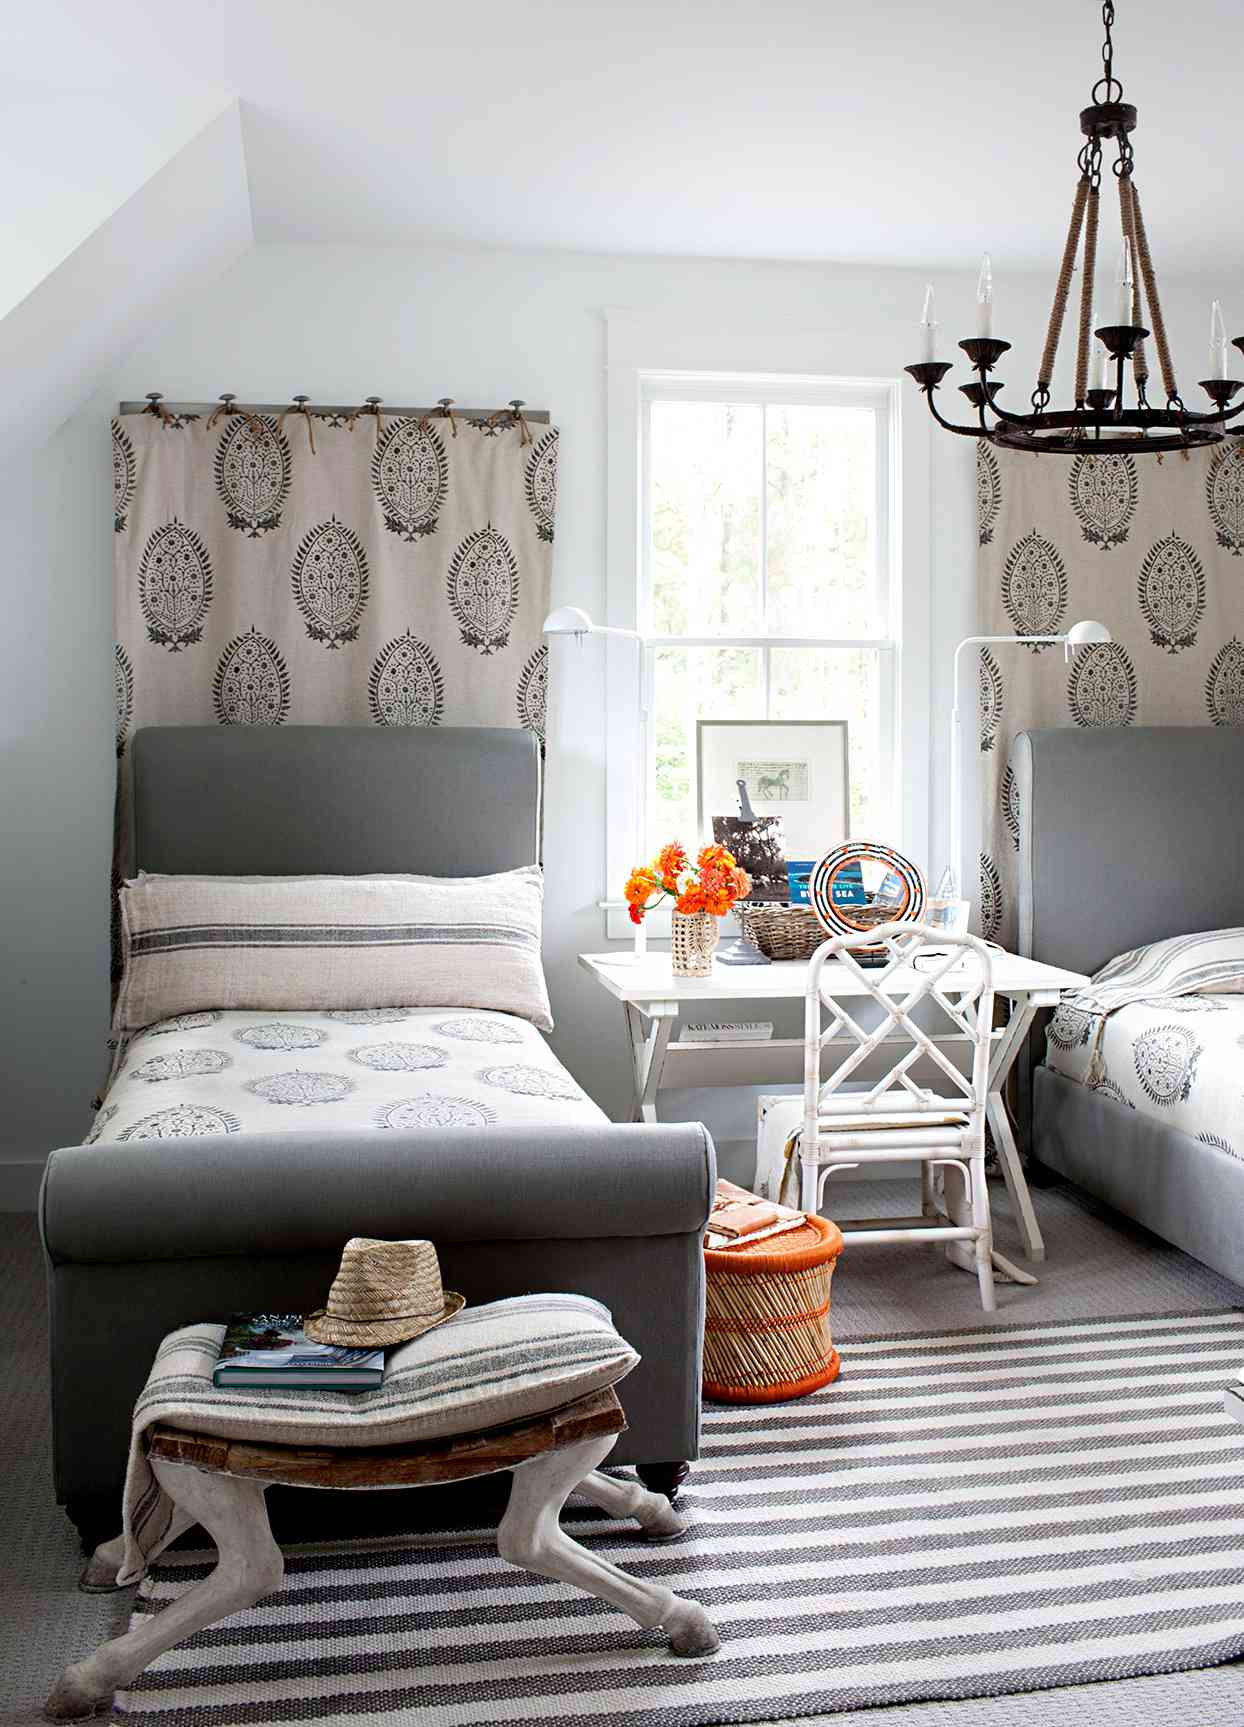 Creative Design Ideas for Shared Small Bedrooms for Boys or Girls ...